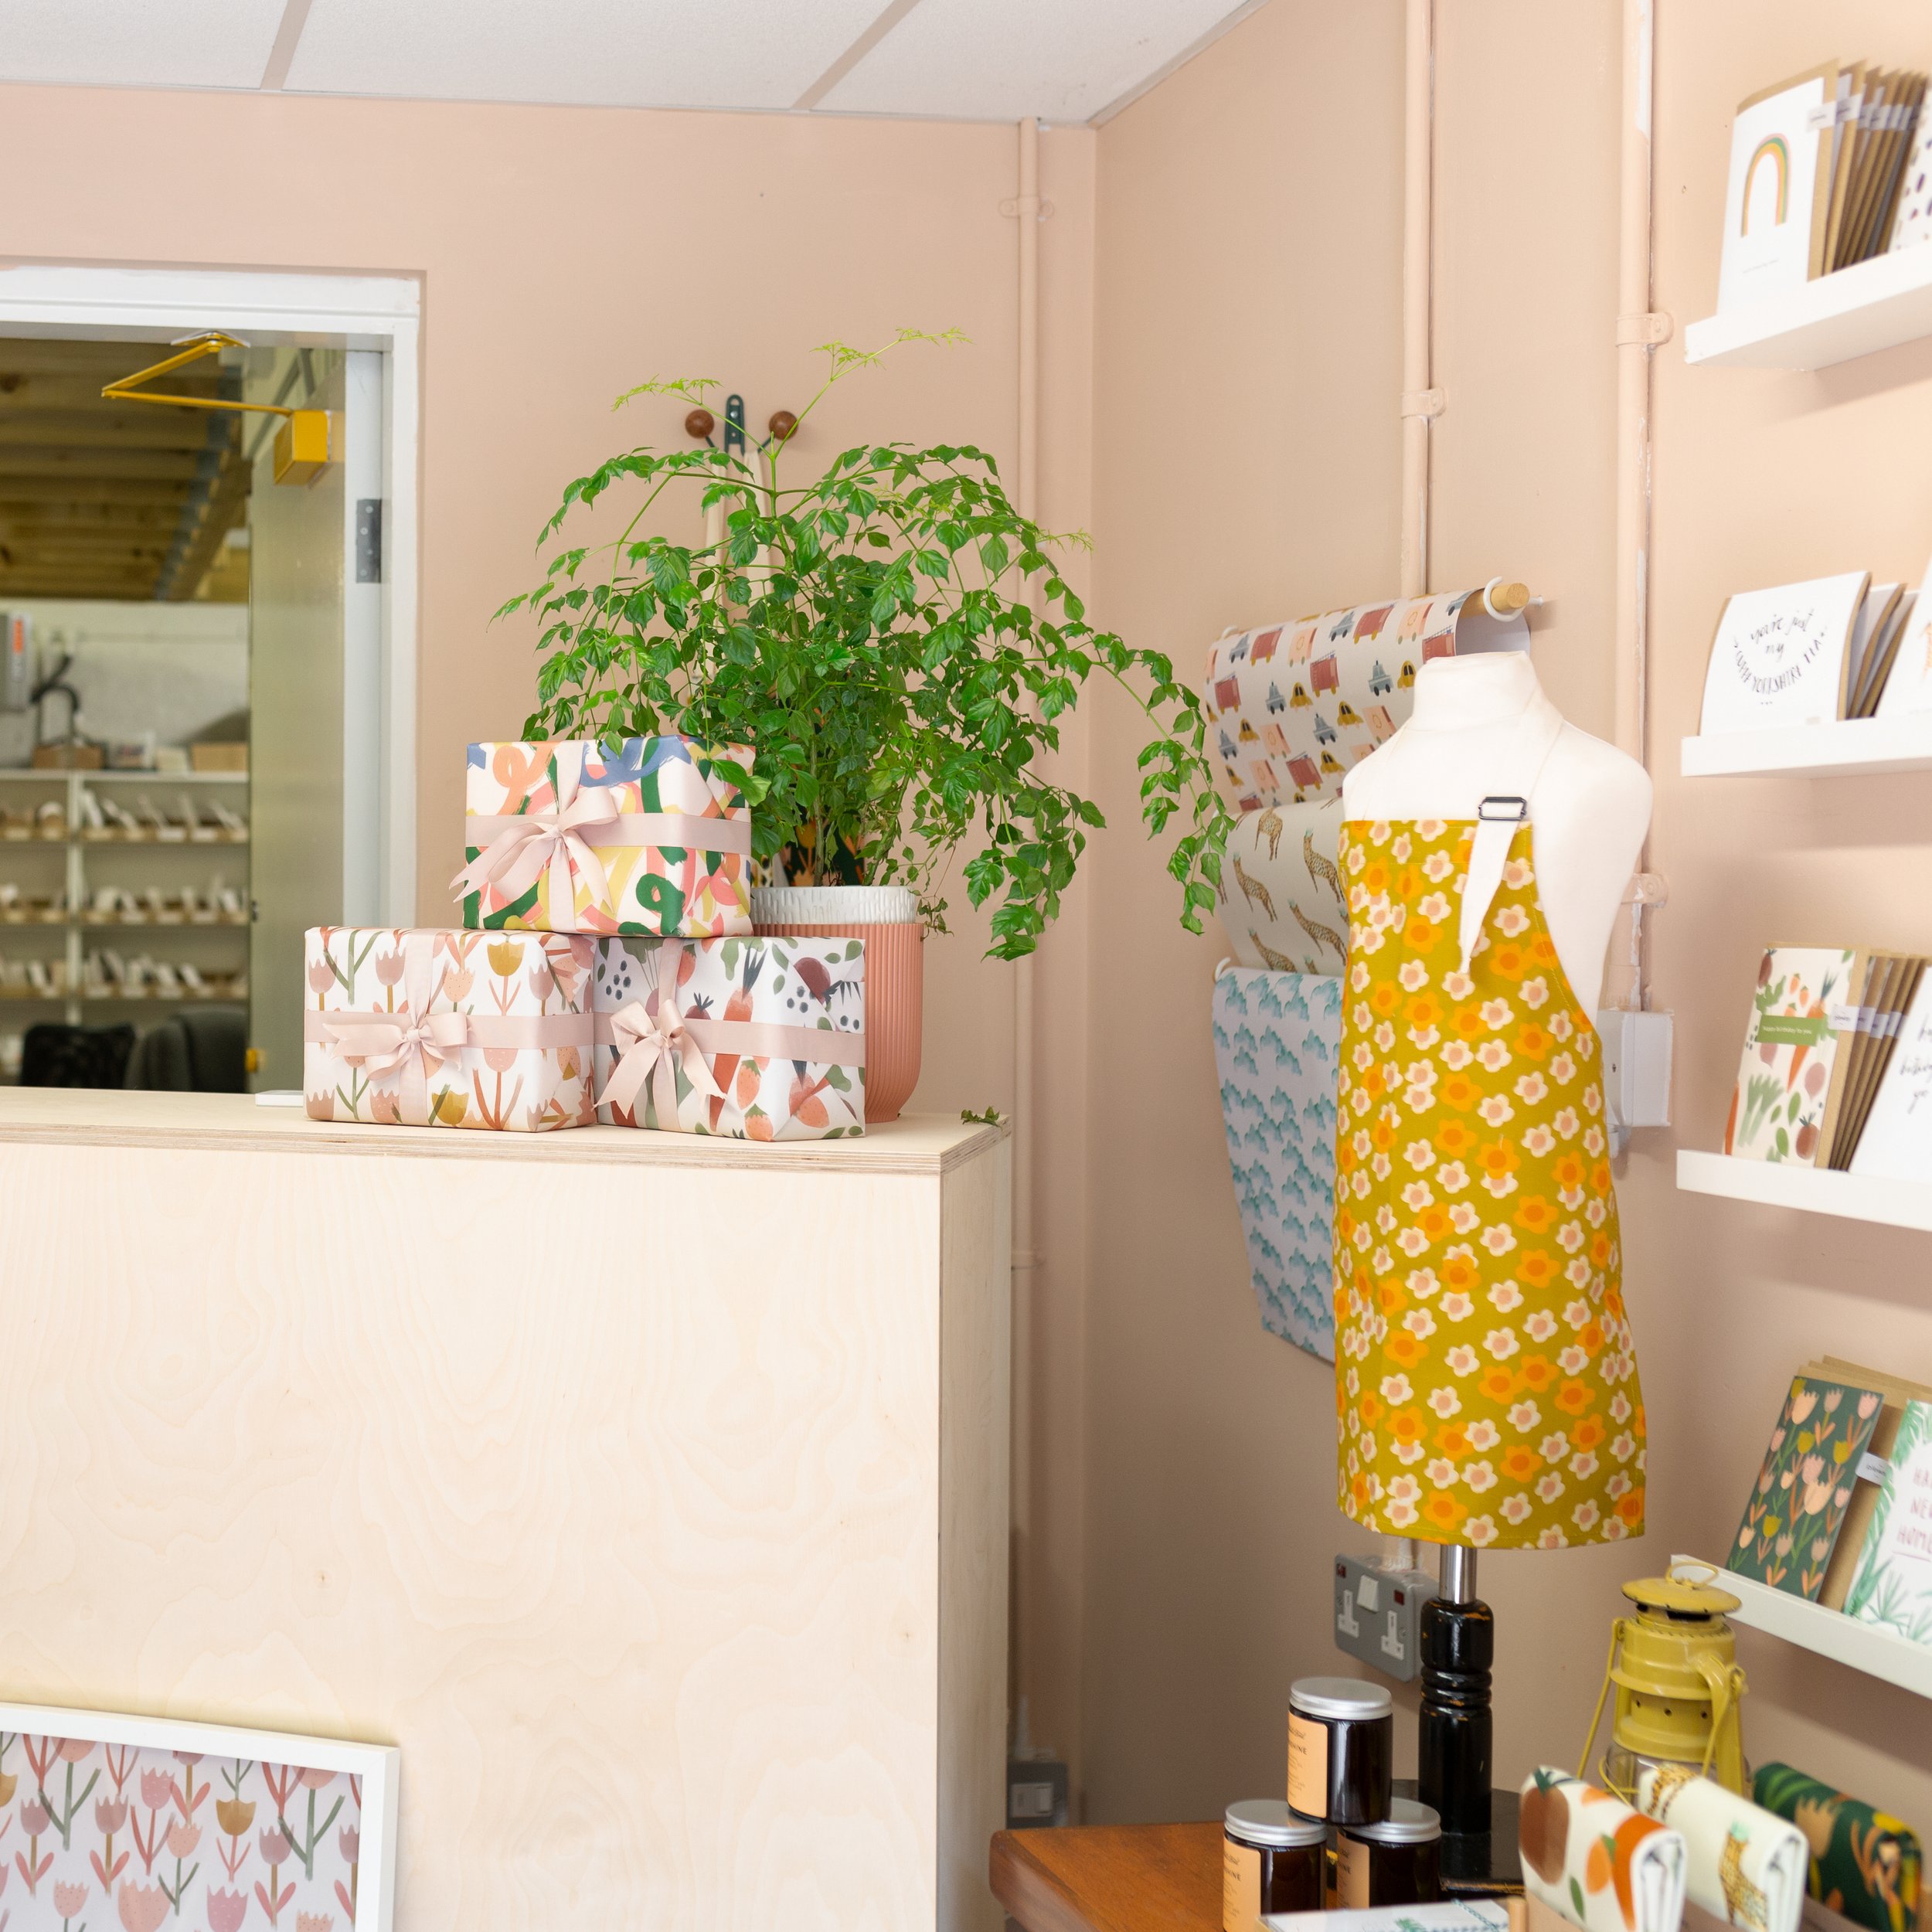 Bright floral sustainable gifts and homeware by sustainable British brand Plewsy in their Yorkshire studio